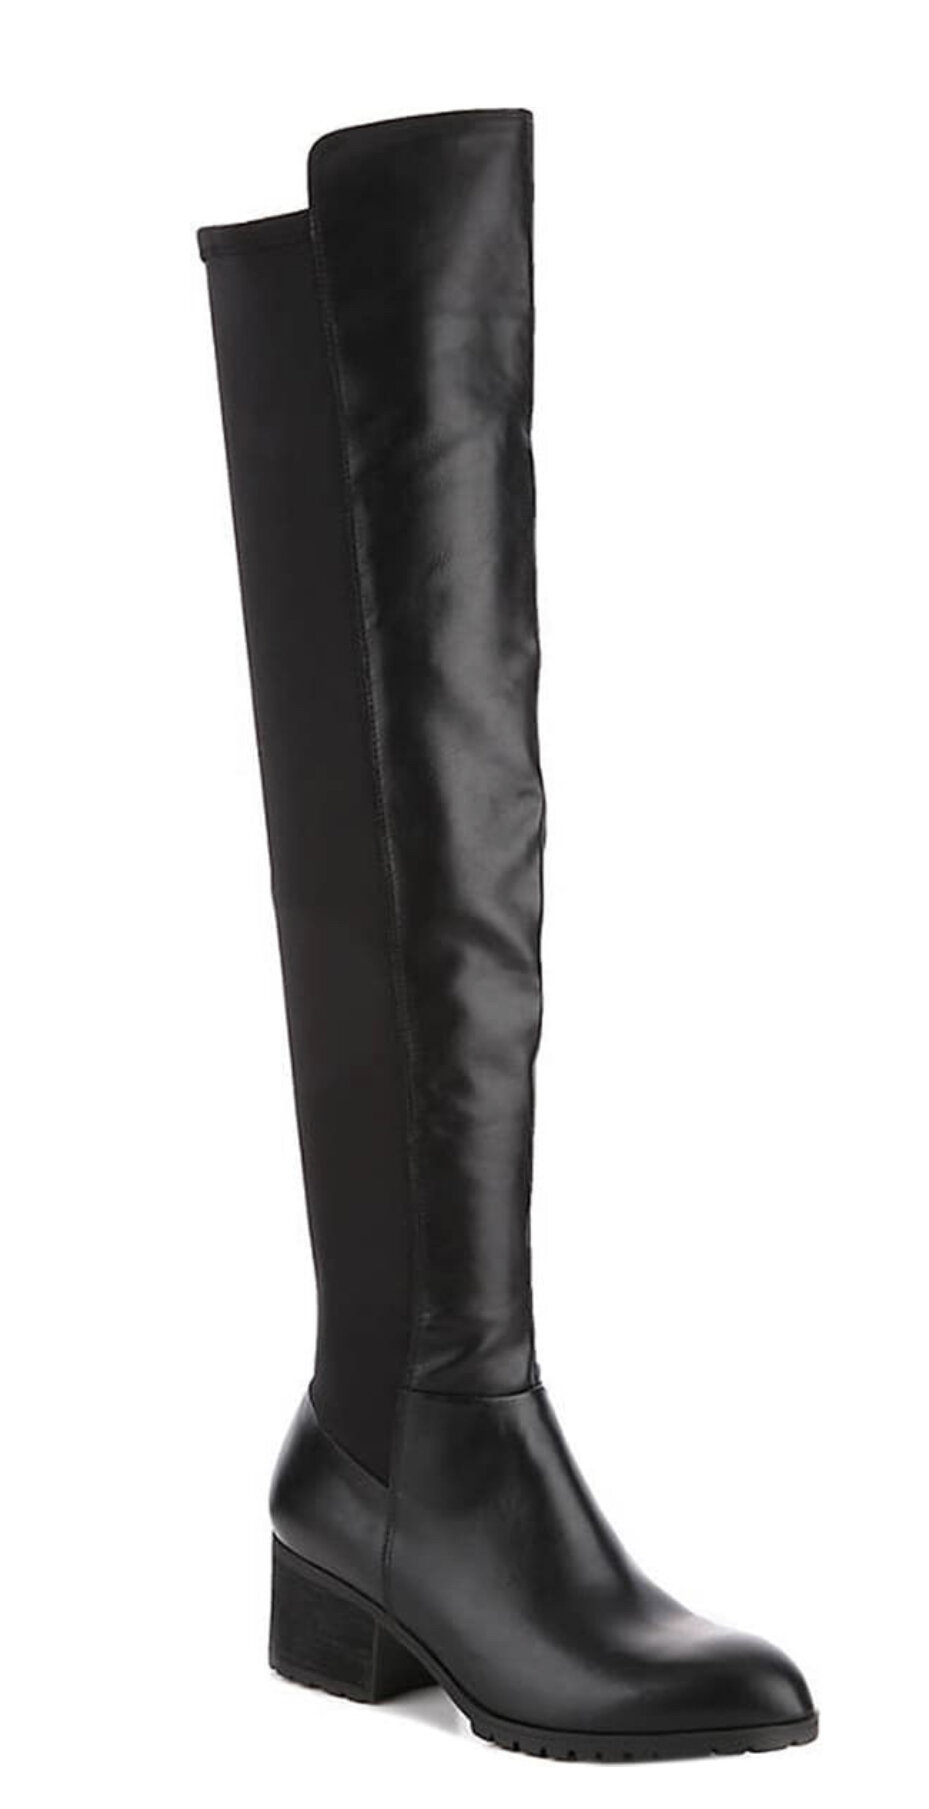 Charles by Charles David over the knee black boots